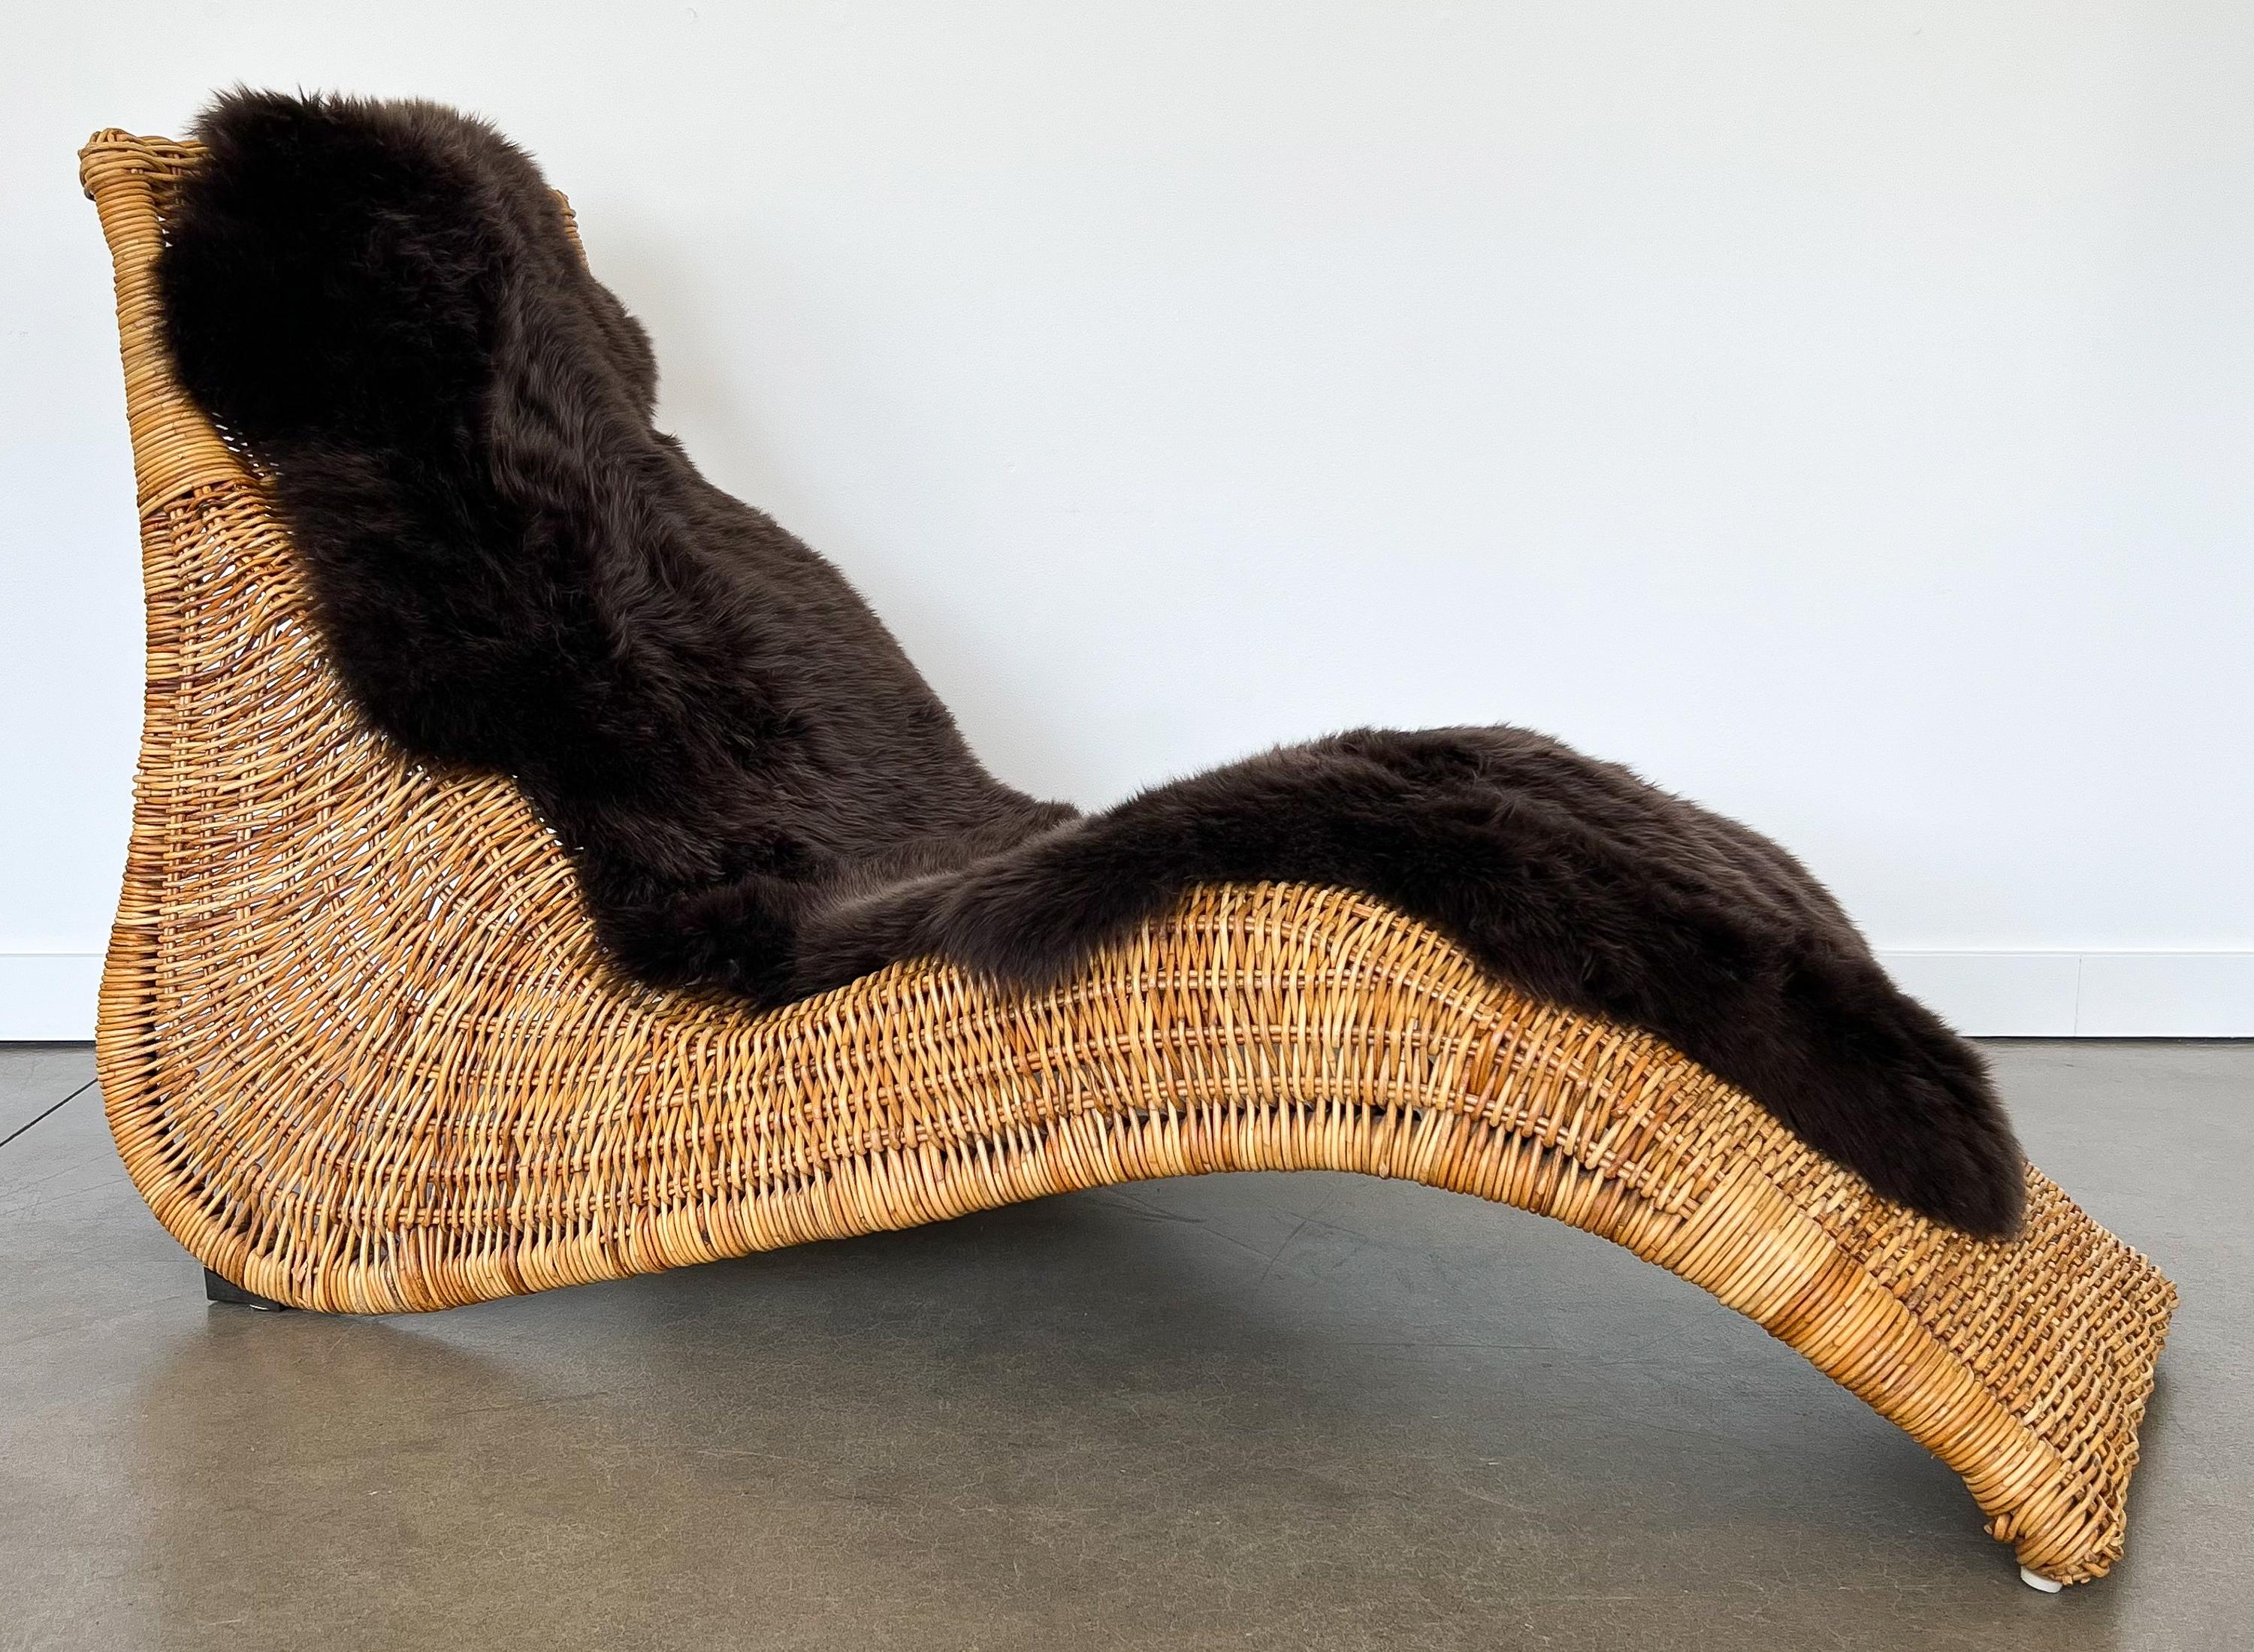 Karlskrona rattan wicker chaise lounge chair by Karl Malmvall for Ikea, Sweden circa 1990s. The Karlskrona chaise features a sculptural, organic undulating form in woven wicker and bent rattan / bamboo. Plastic glides at front and angled metal